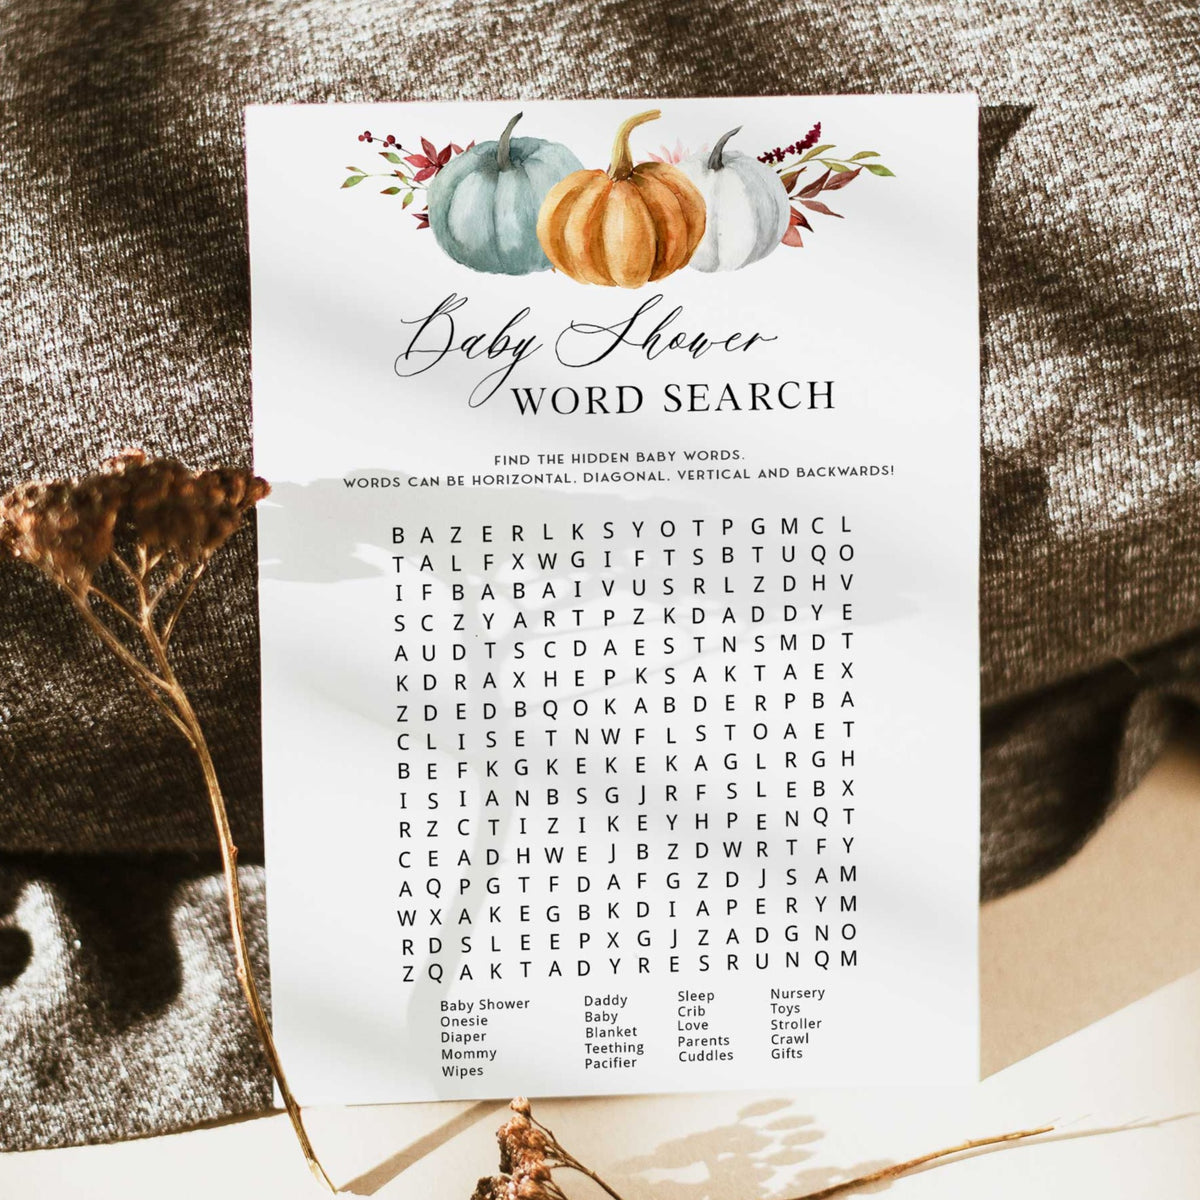 Fully editable and printable baby shower word search game with a fall pumpkin design. Perfect for a Fall Pumpkin baby shower themed party